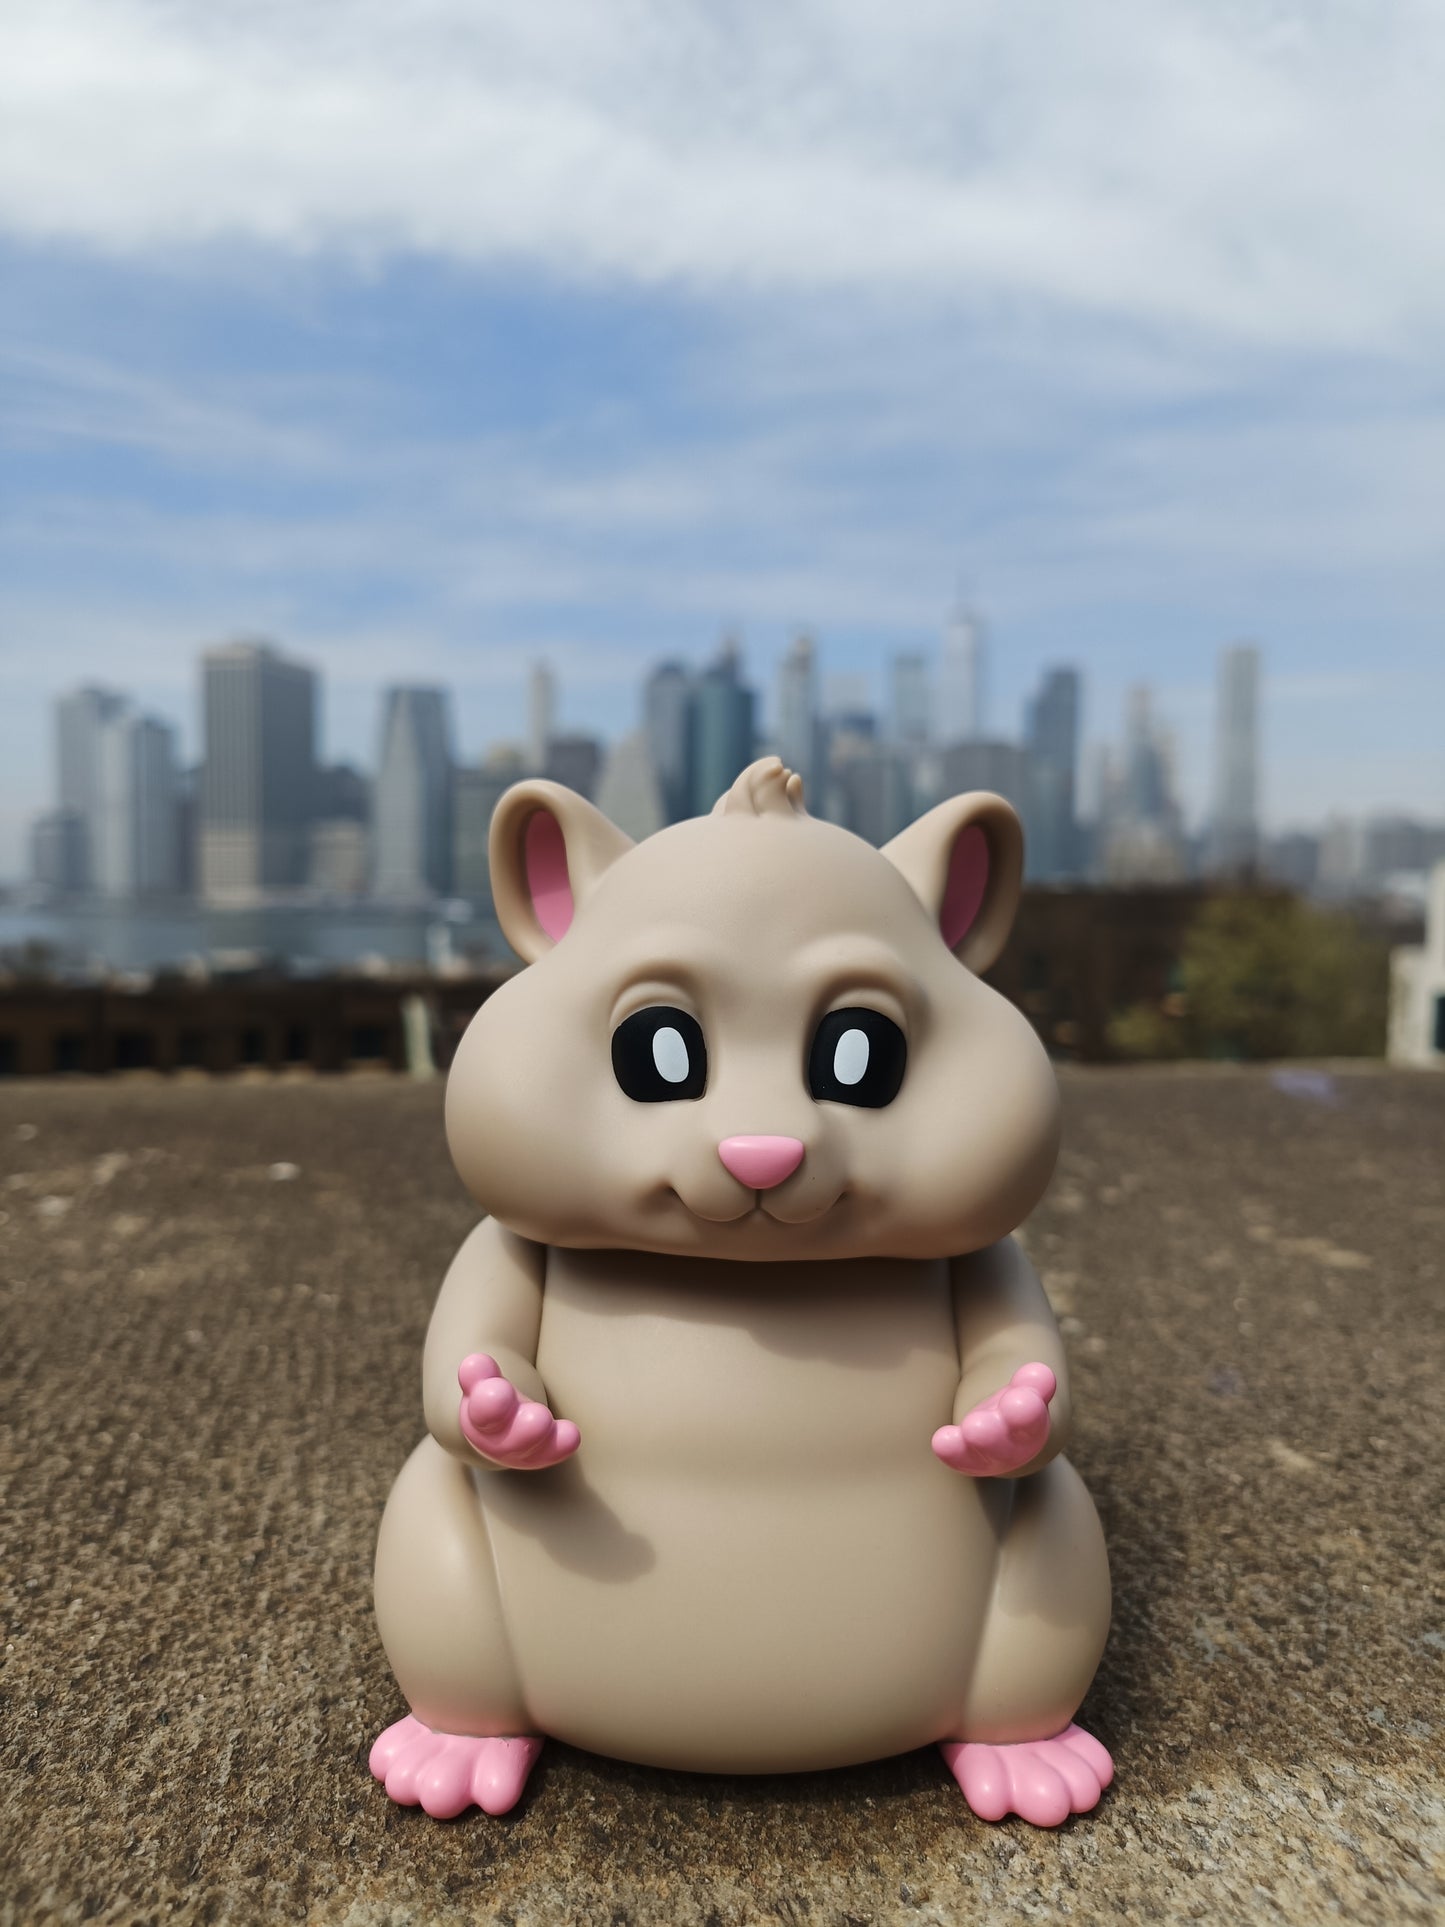 Hungry Hamster Art Toy Collection 1: The Original